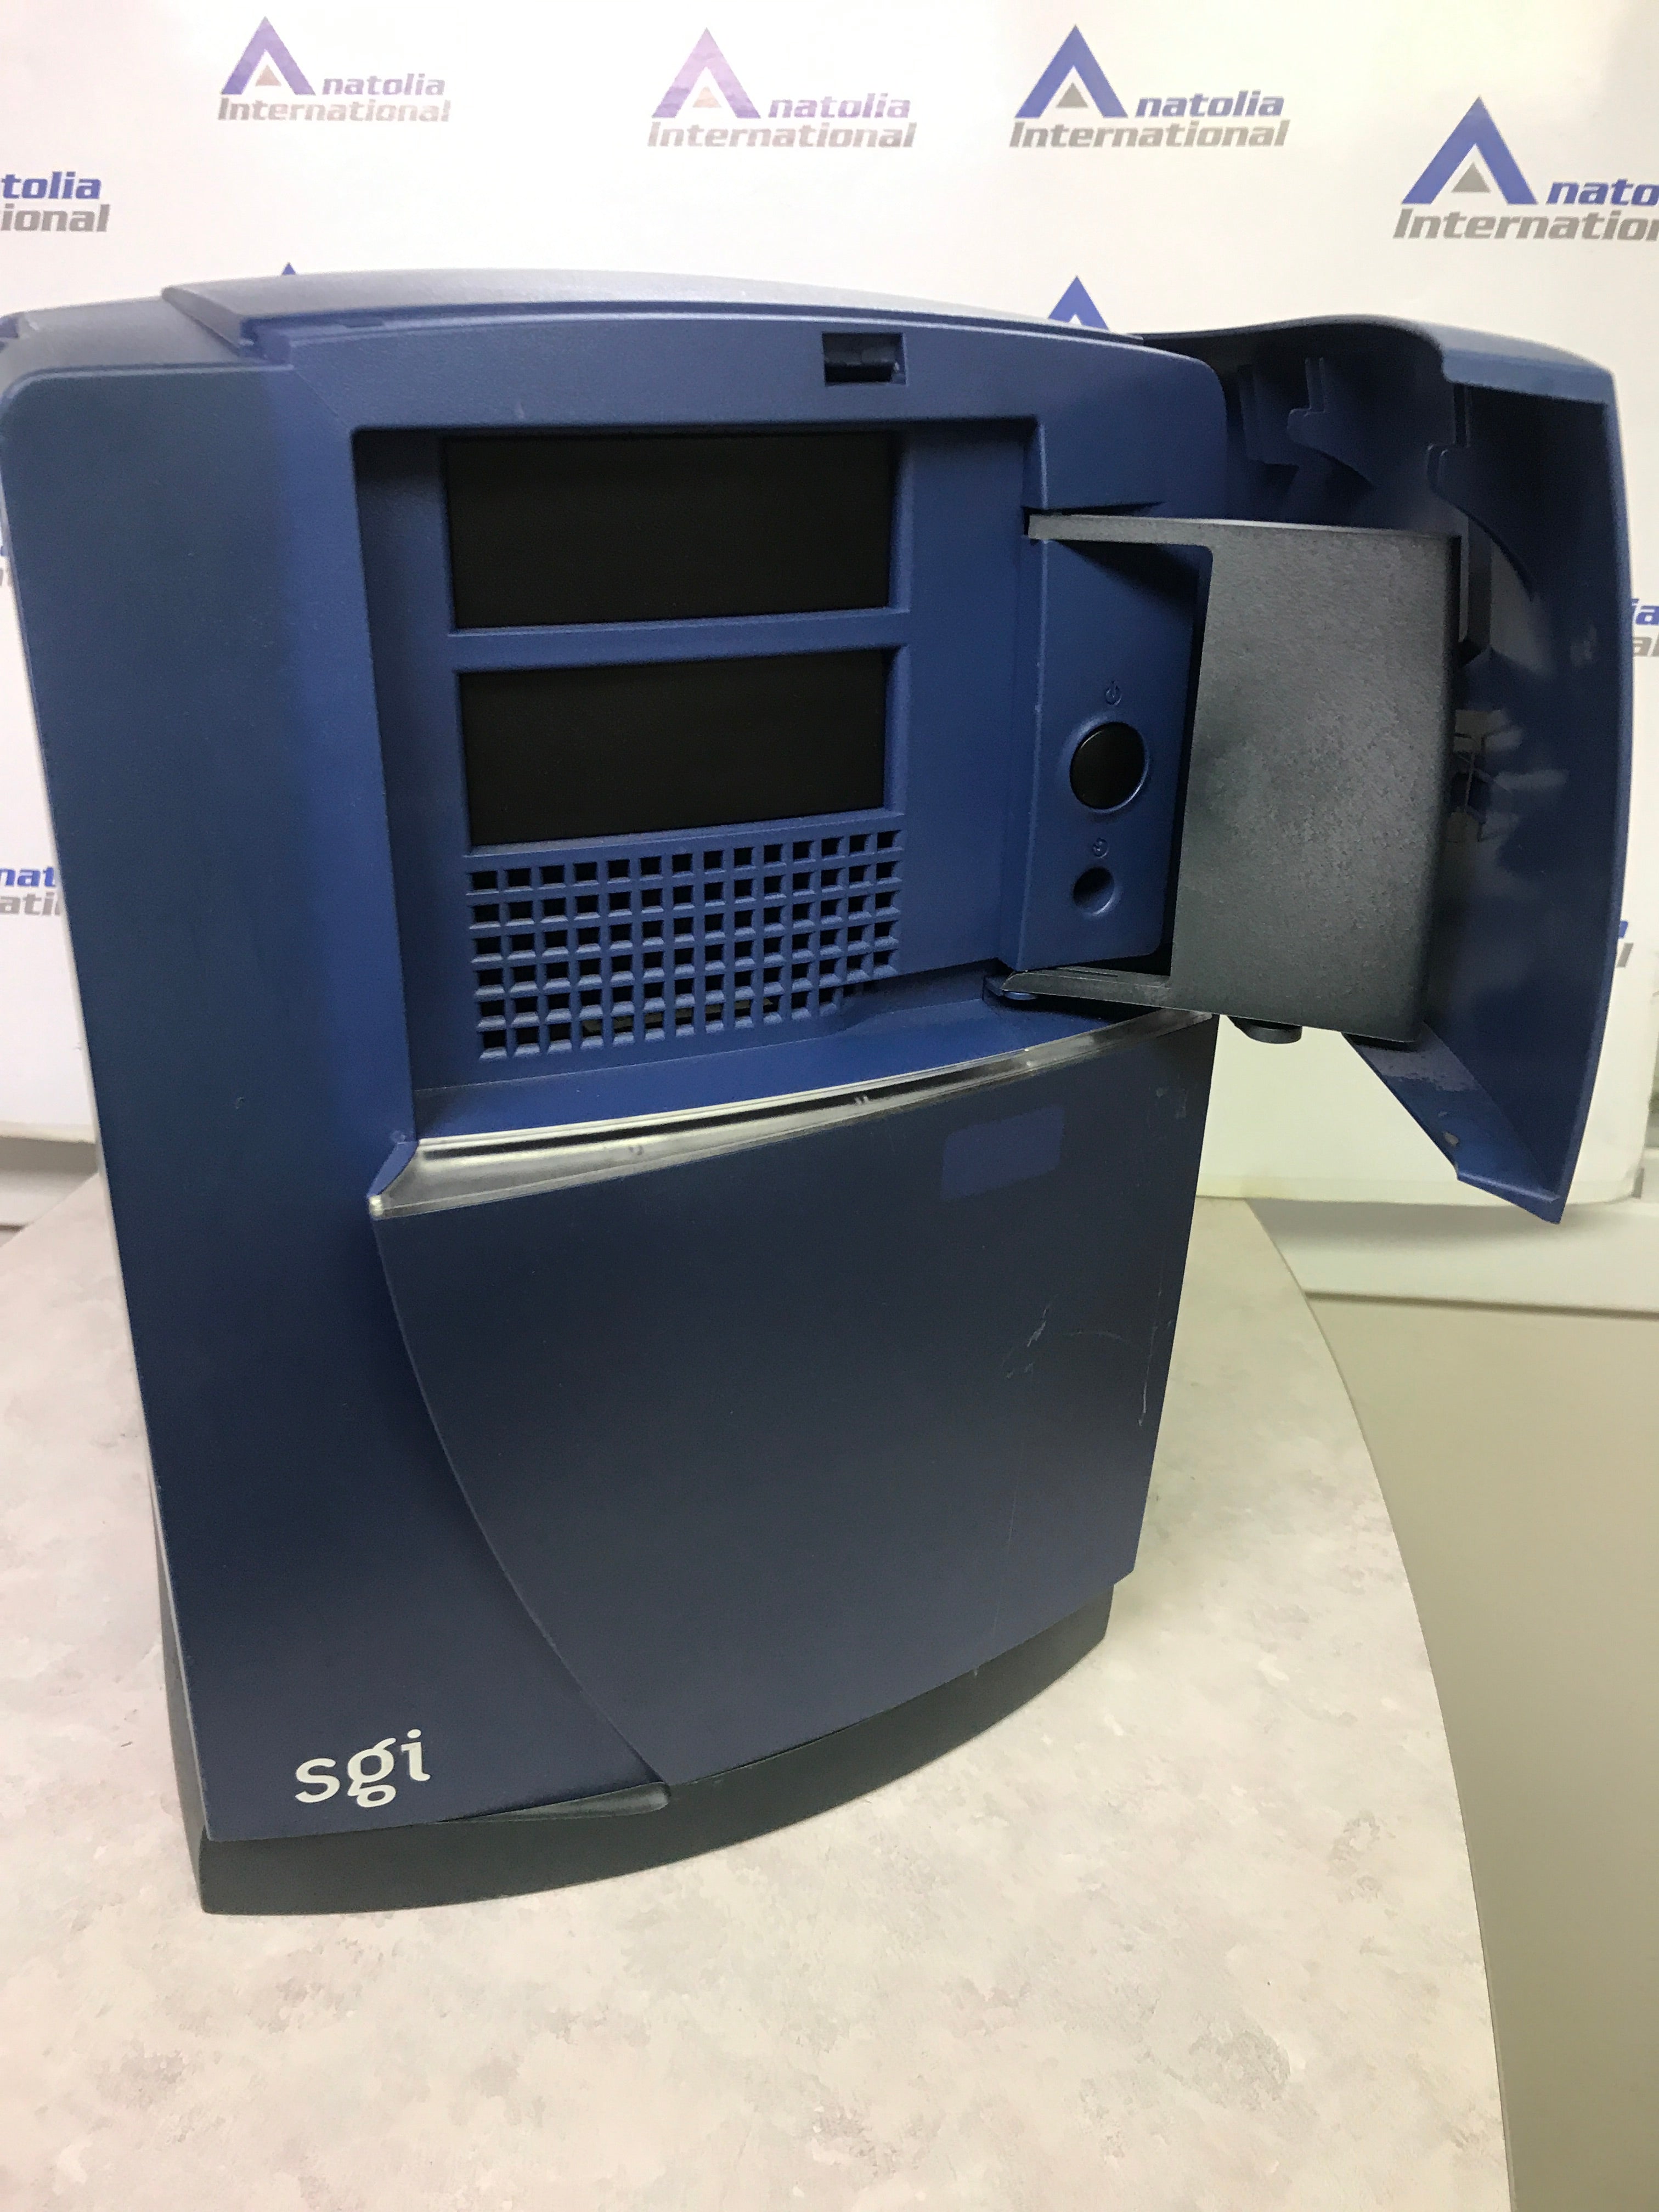 SGI Silicon Graphics Octane2 CMNB015ANG360 For GE MRI CT Scanner Systems